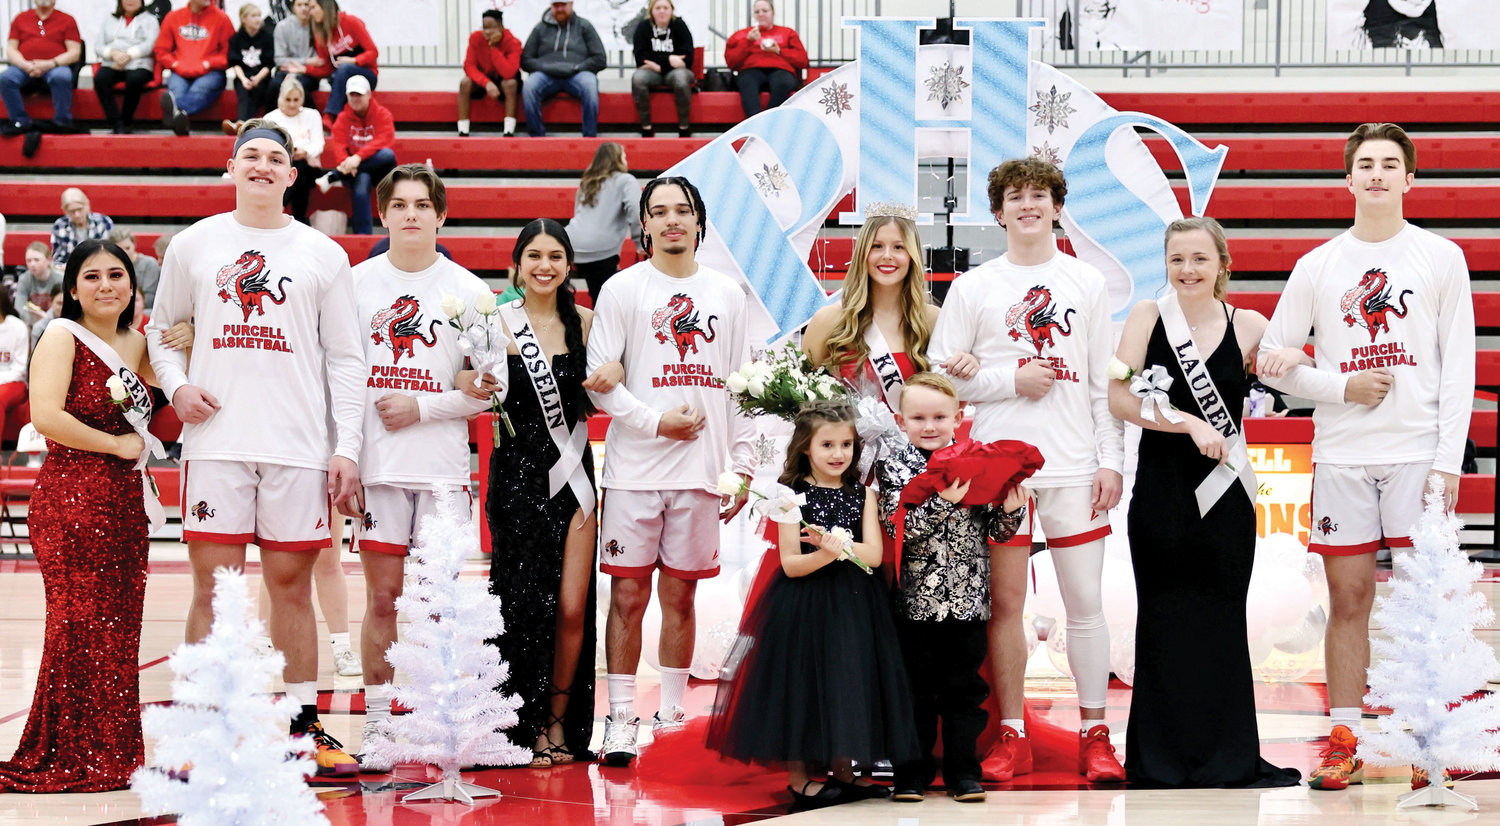 The Purcell homecoming court included, from left, Genesis Canales, Hayden Ice, Hayden Renfro, Yoselin Estrada, Malachi Evans, Queen KK Eck, King Lincoln Eubank, Lauren Holmes and Brody Galyean. The flower girl was Layla Smith and the crown bearer was Beau Cunnius.